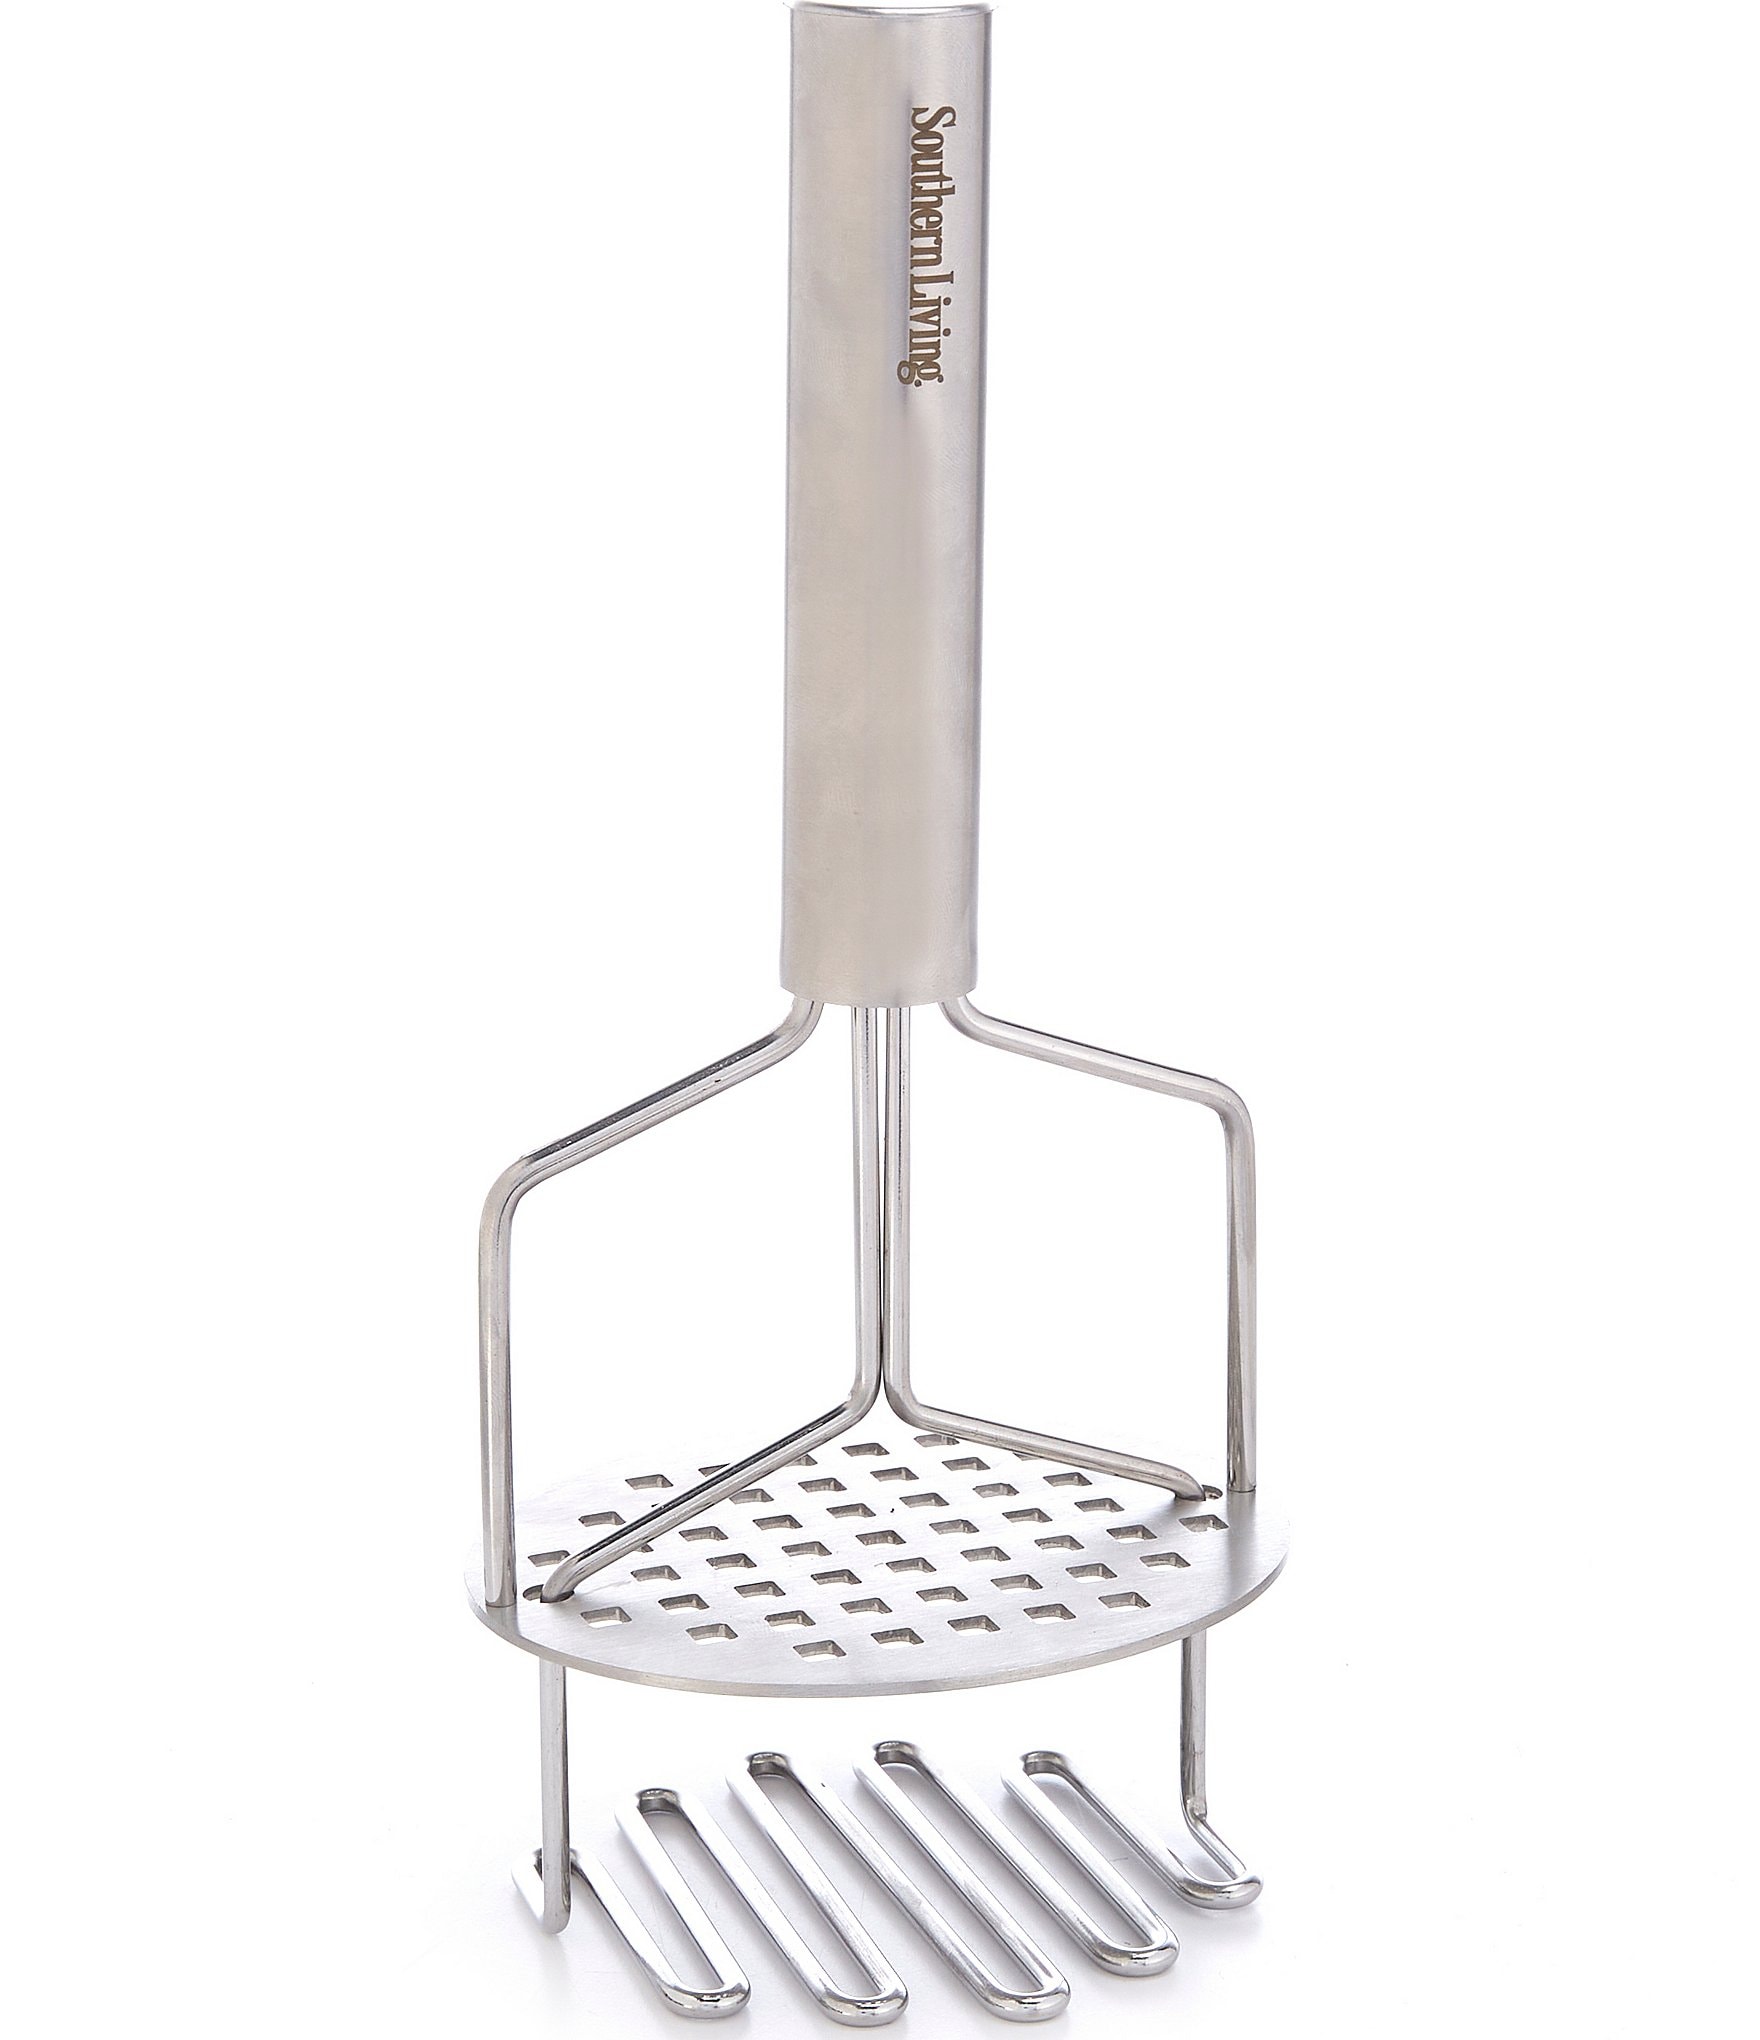 Potato Masher - Handcrafted in the USA - lldecor